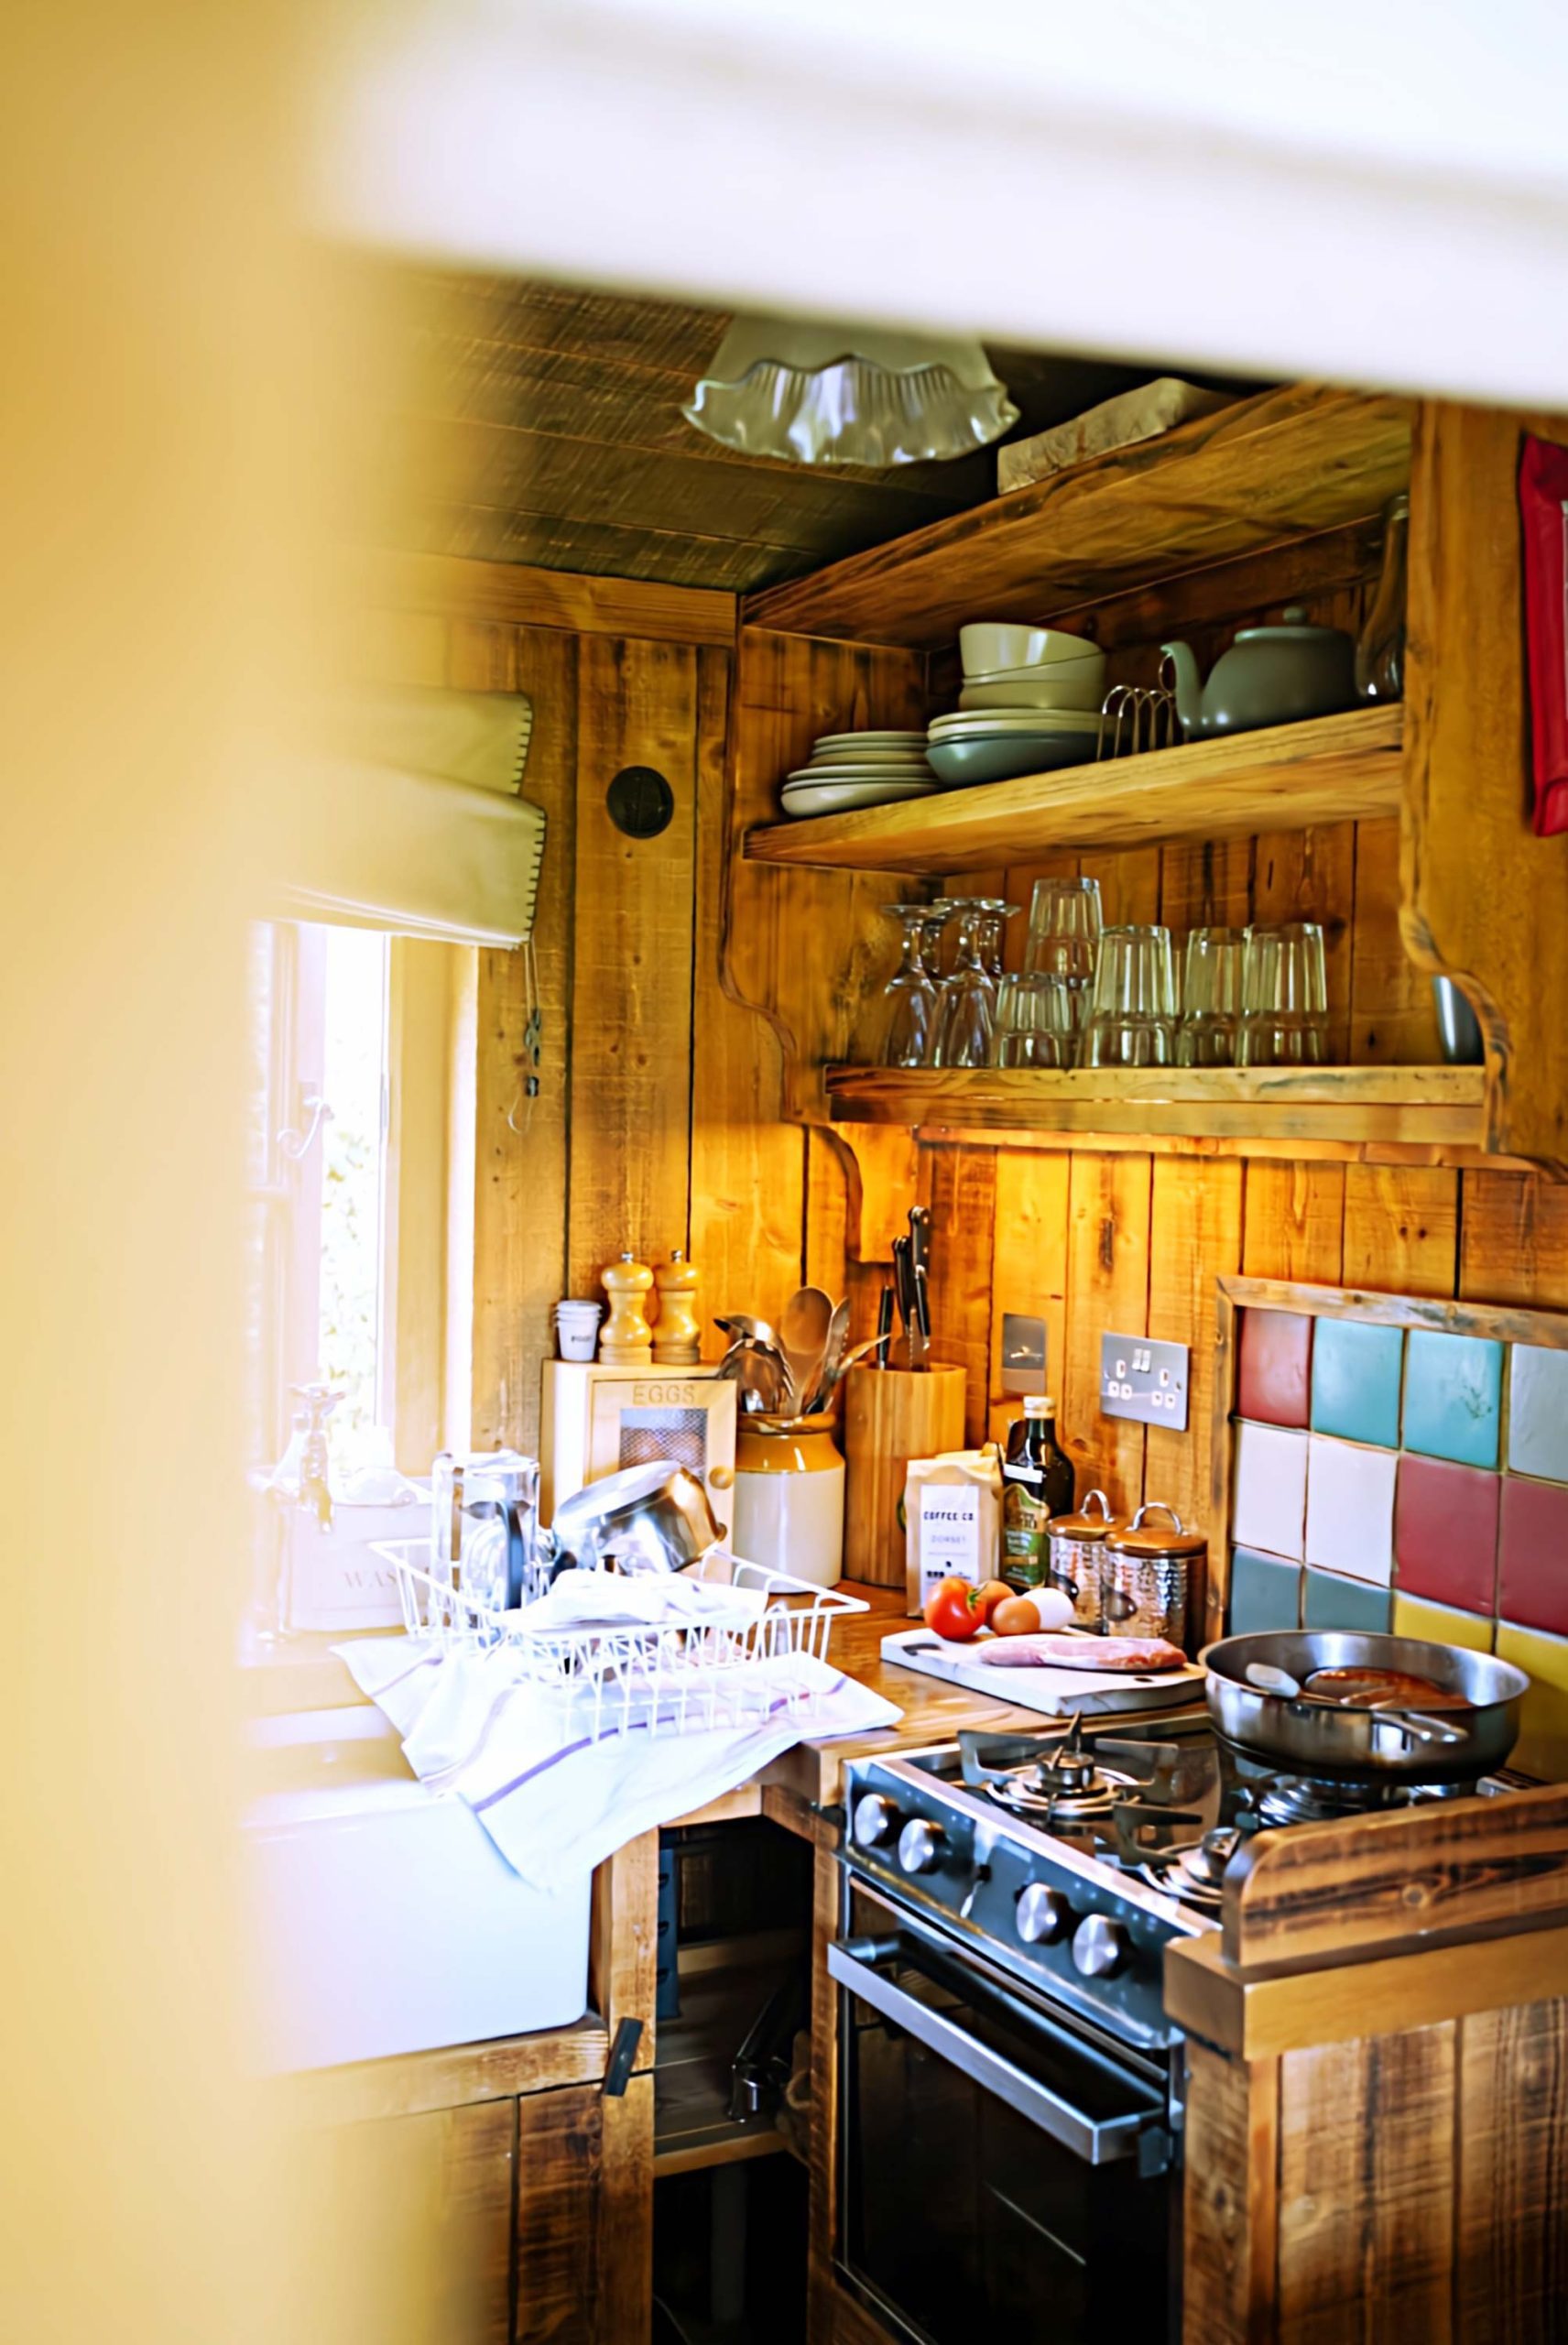 The kitchen in one of Loose Reins' cabins with food cooking on the hob